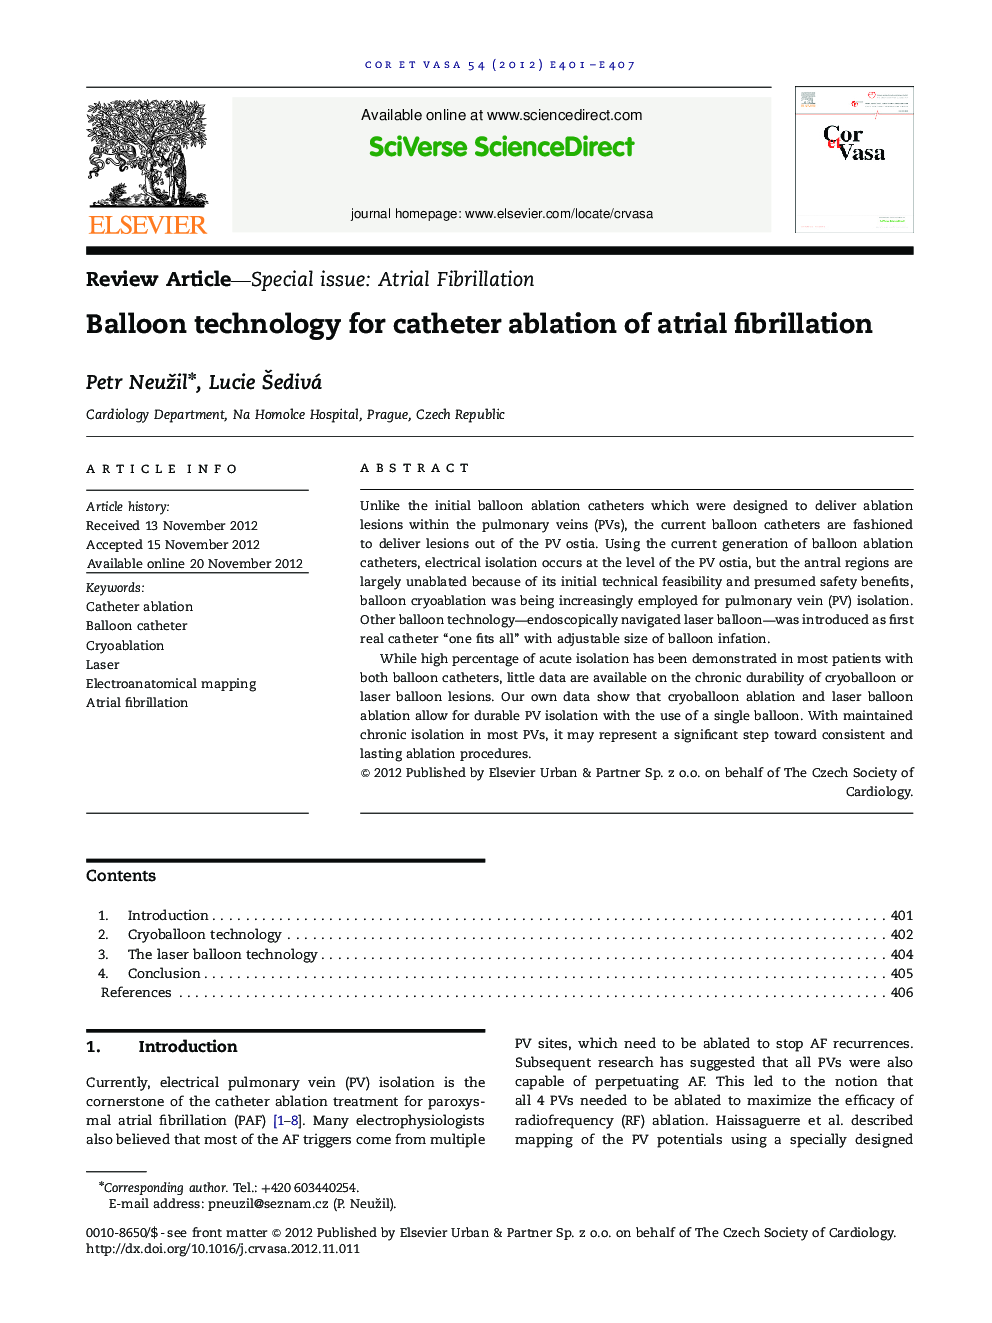 Balloon technology for catheter ablation of atrial fibrillation